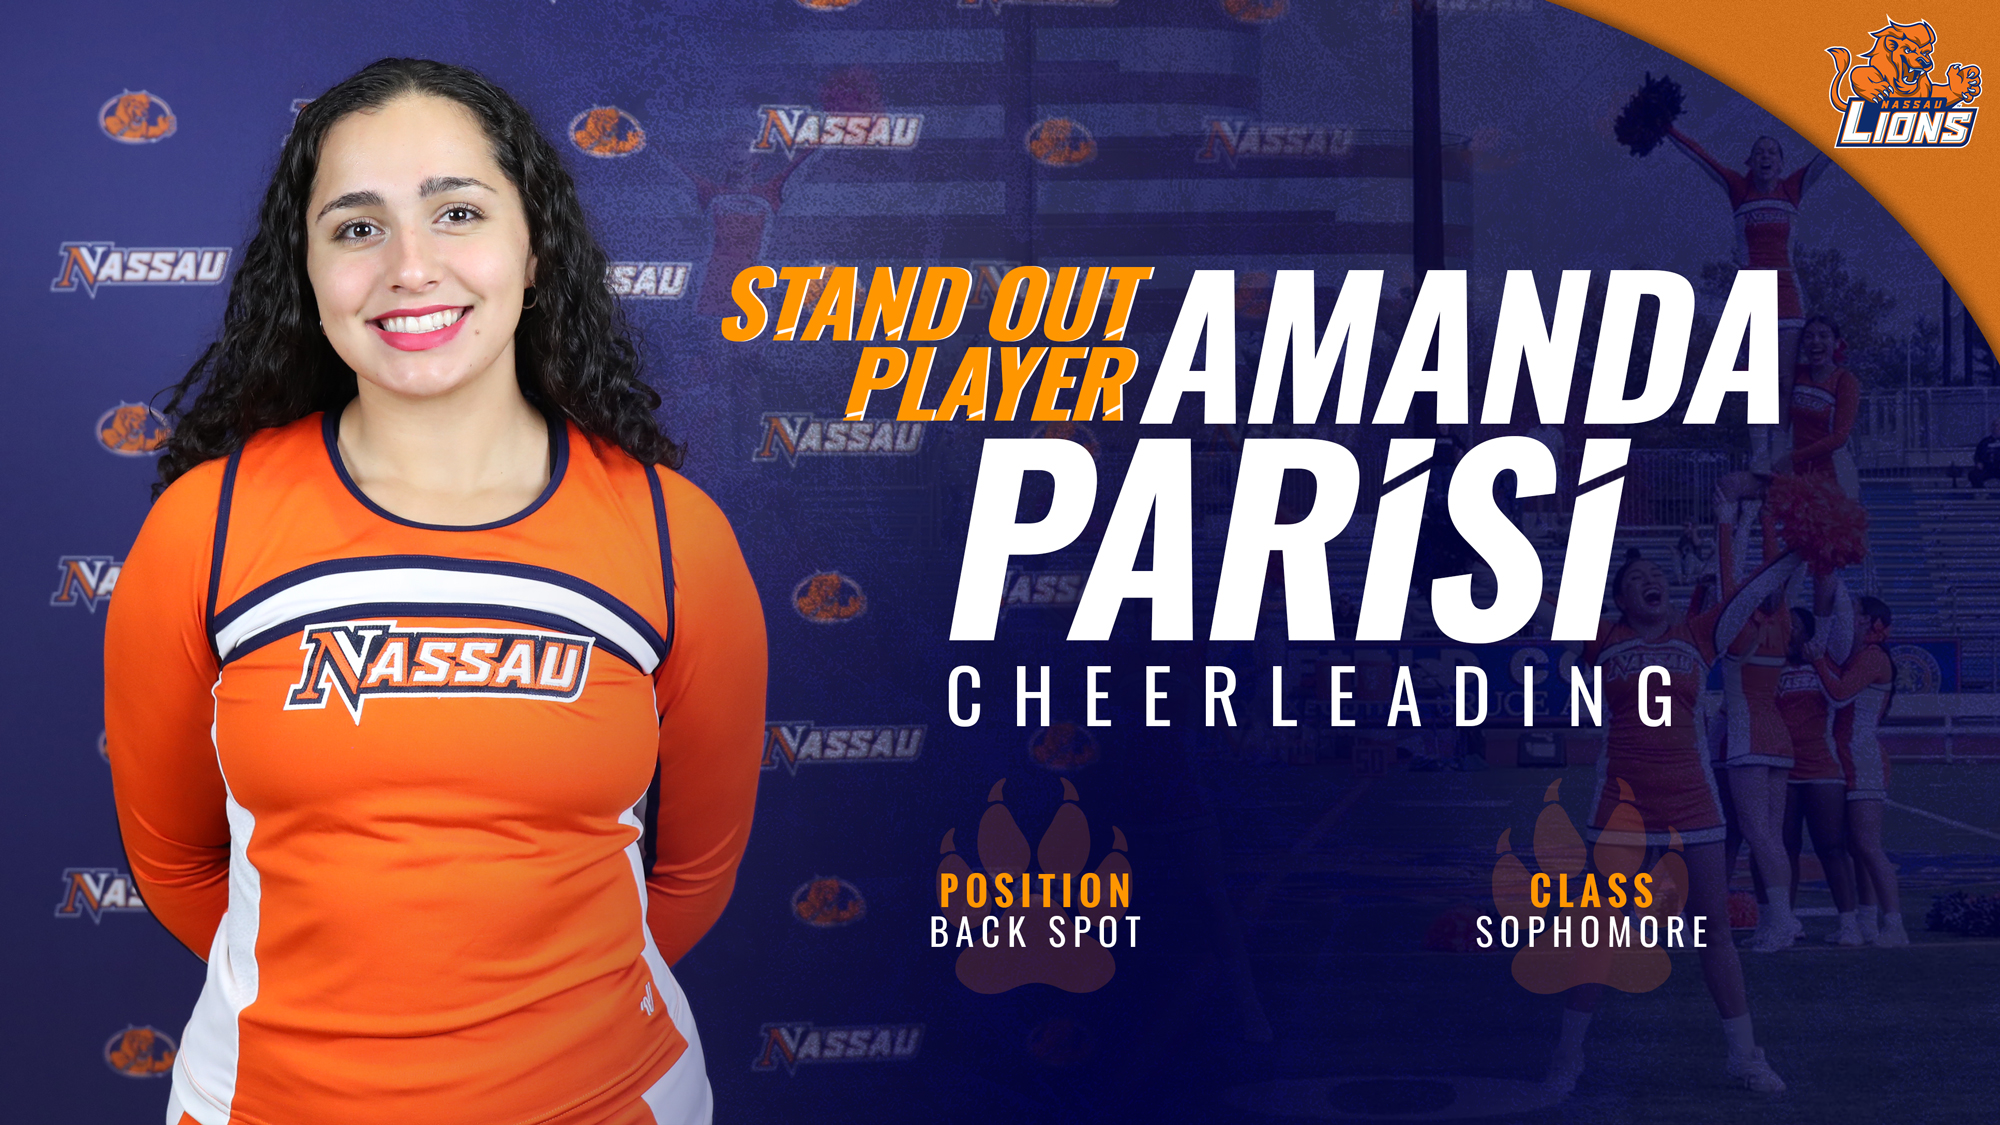 Amanda Parisi has been named the most recent Nassau Lions standout Player.